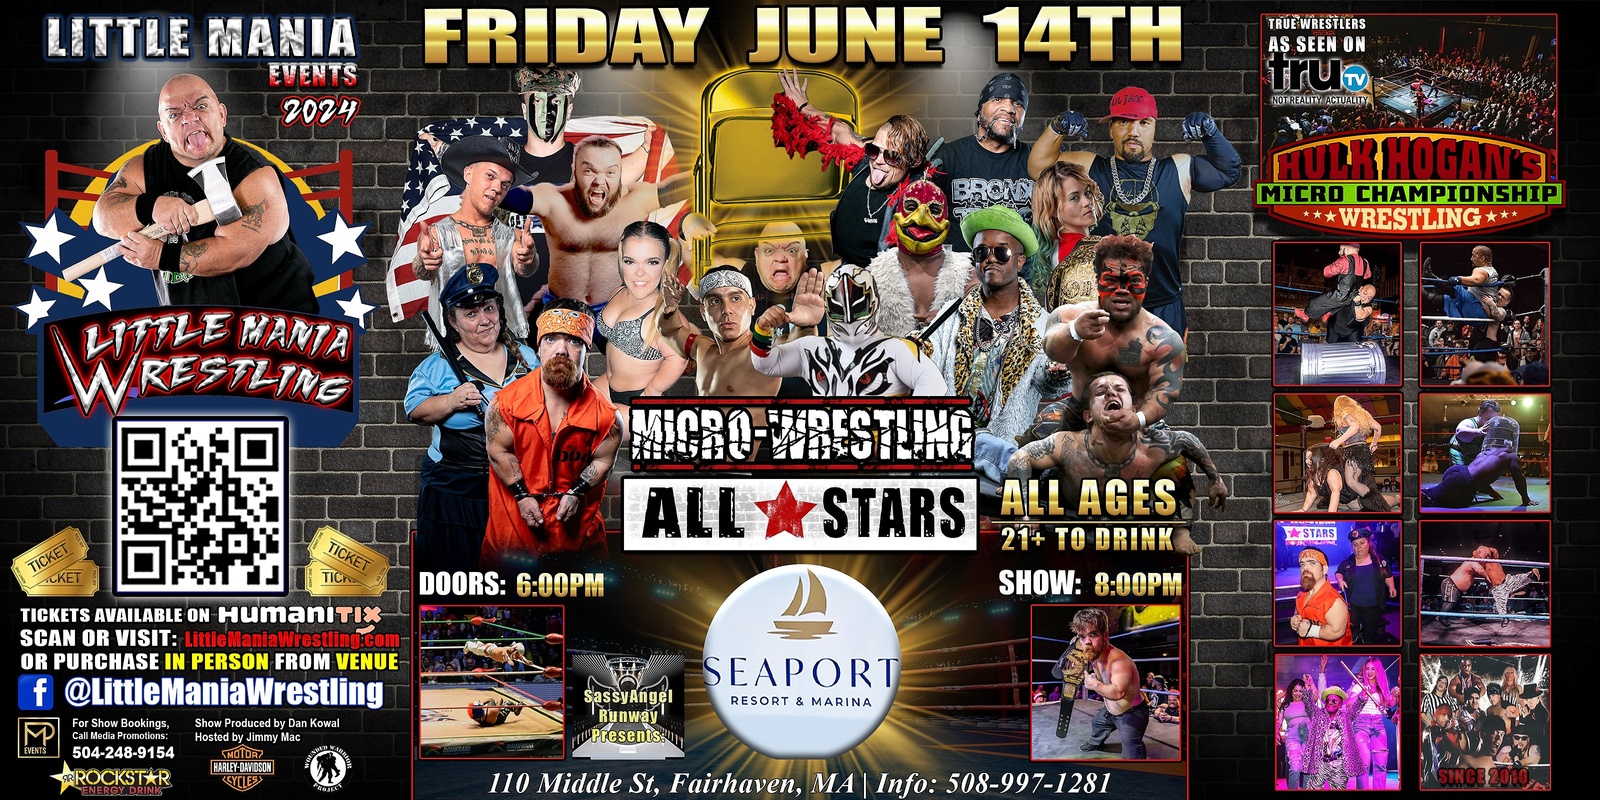 Banner image for Fairhaven, MA - Micro-Wrestling All * Stars: Round 2! Show #1- All Ages! Little Mania Rips Through the Ring!